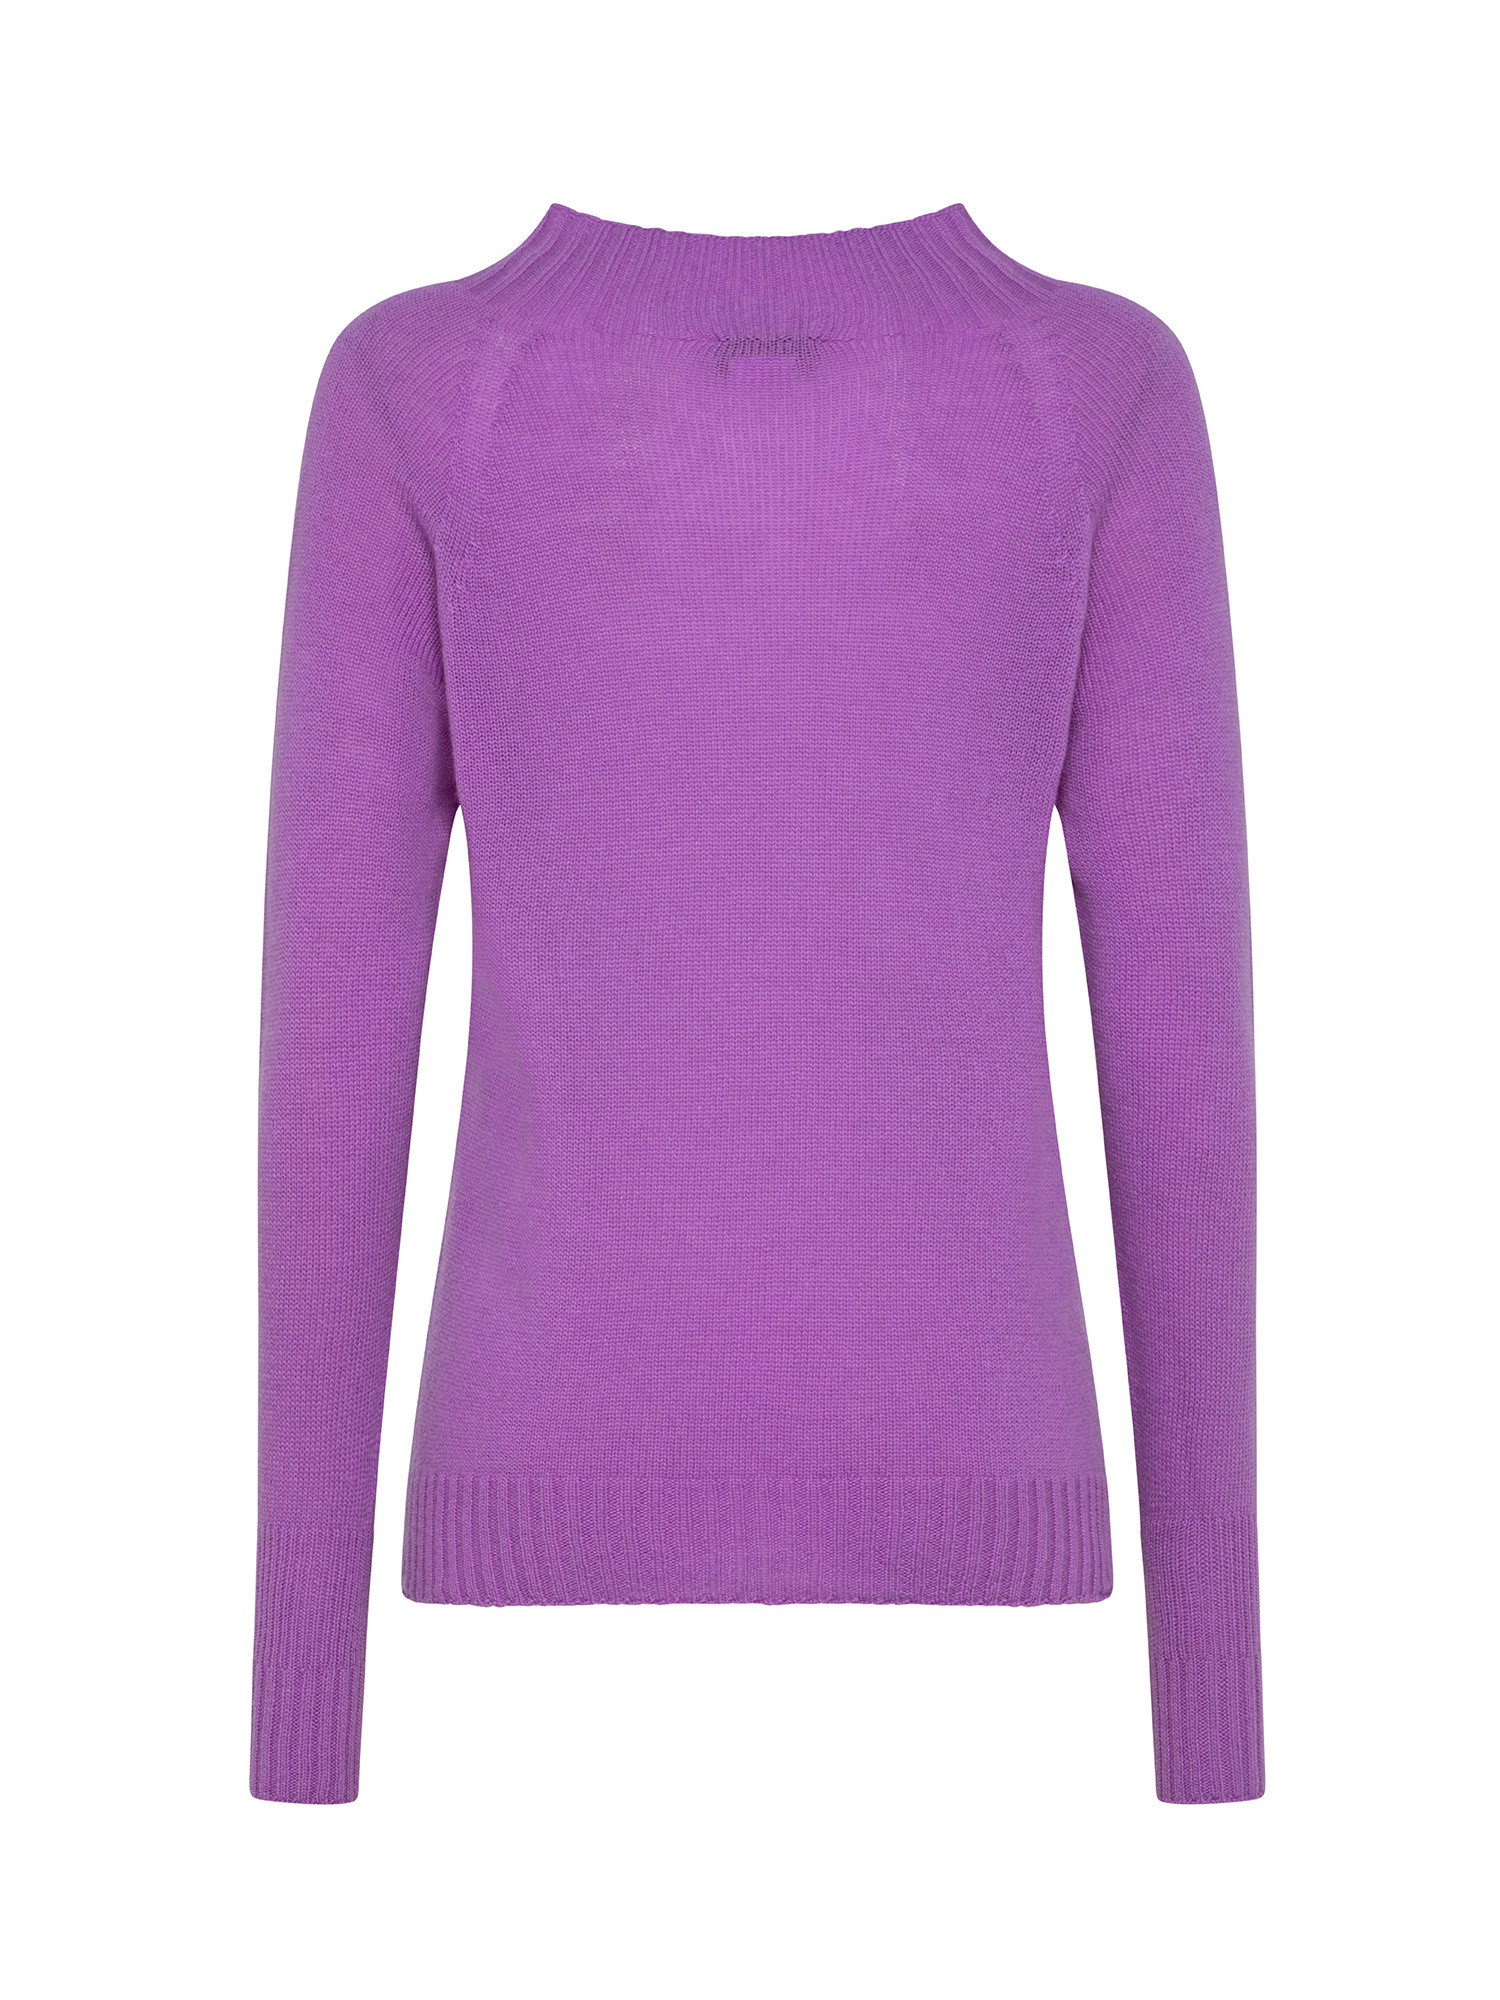 K Collection - Crater neck sweater, Purple Lilac, large image number 1